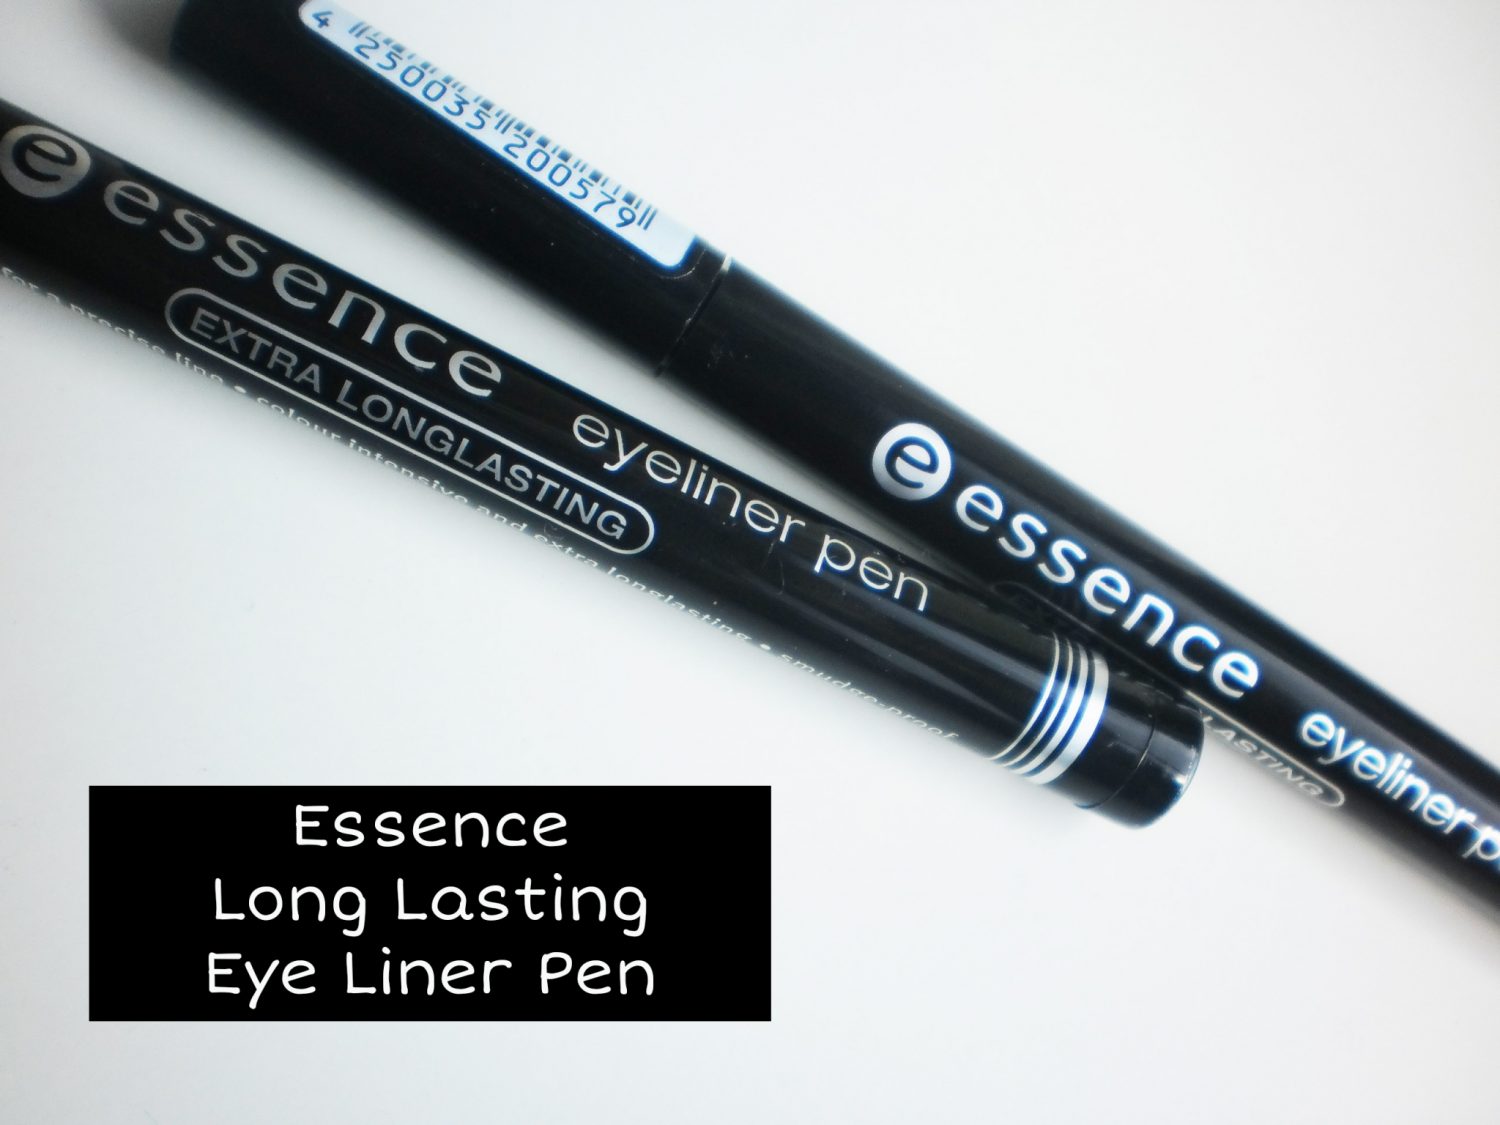 Review: Essence Extra Long Lasting Eye Liner Pen